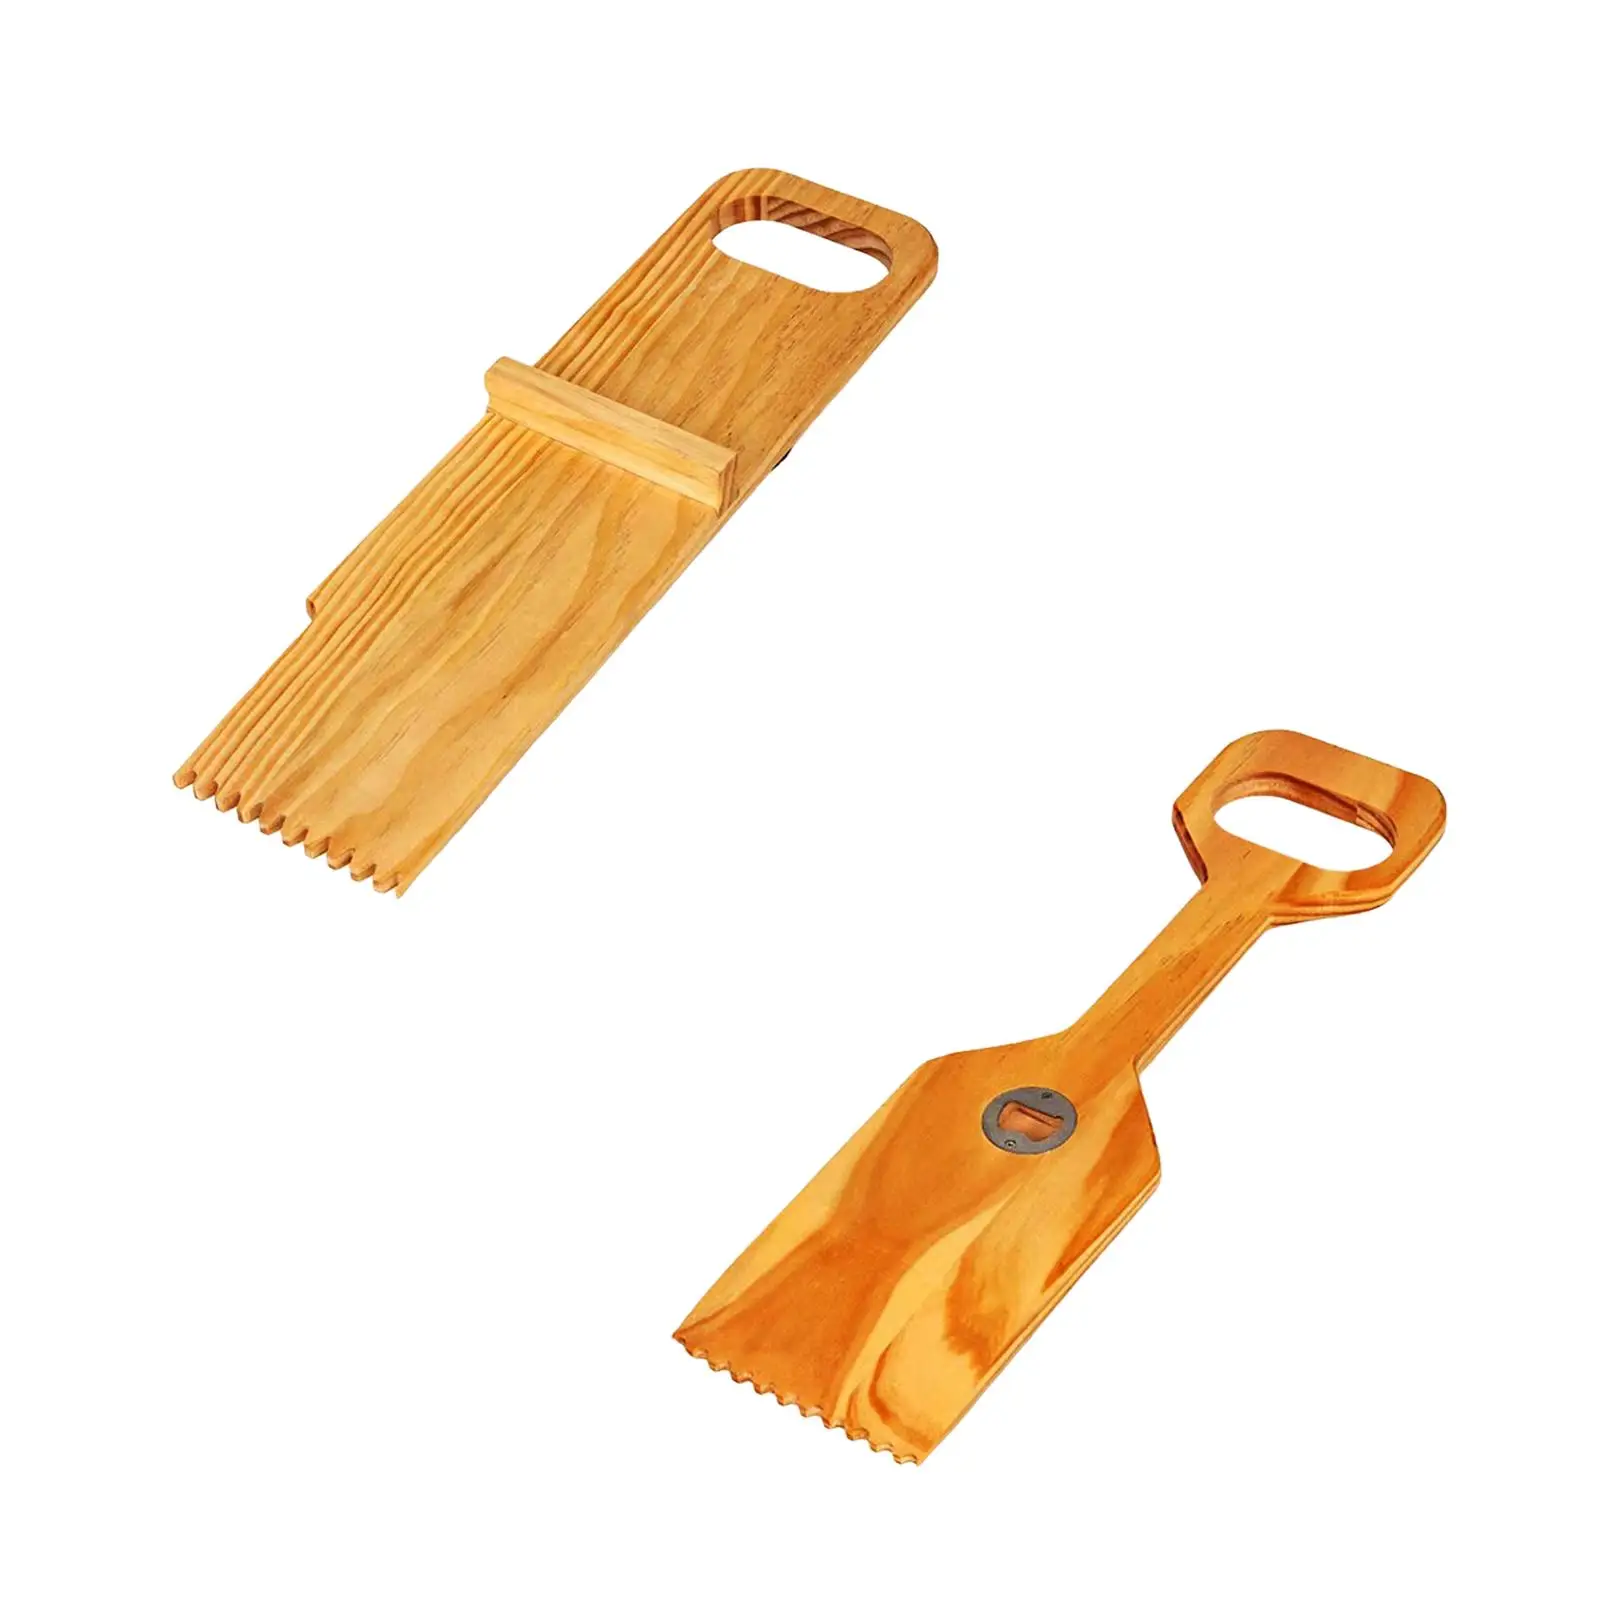 Wood Griddle Spatula Portable Multipurpose Hanging Heat Resistant Quickly Cleaning Cookware Grill Utensils for Serving Turning